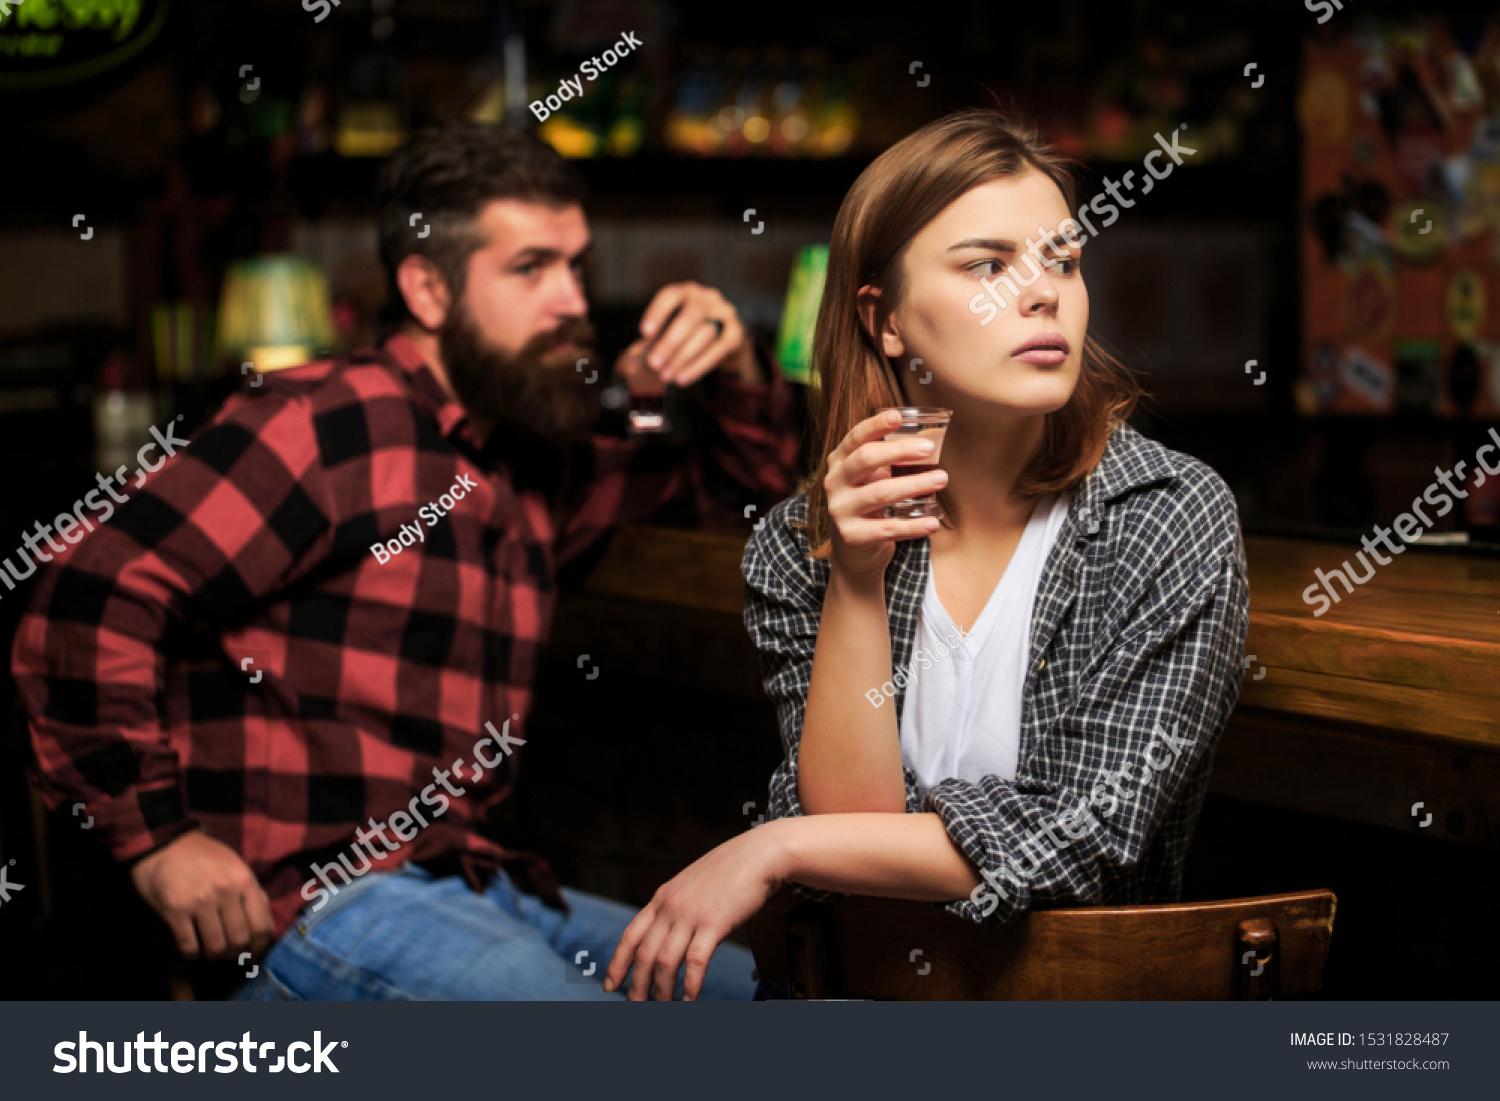 Female male alcoholism. Woman and man alcoholism. Woman alcoholic beverage in bar. Young woman has problems with alcohol. Alcoholism, alcohol addiction, male alcoholic. Young man drinking alcohol. #1531828487